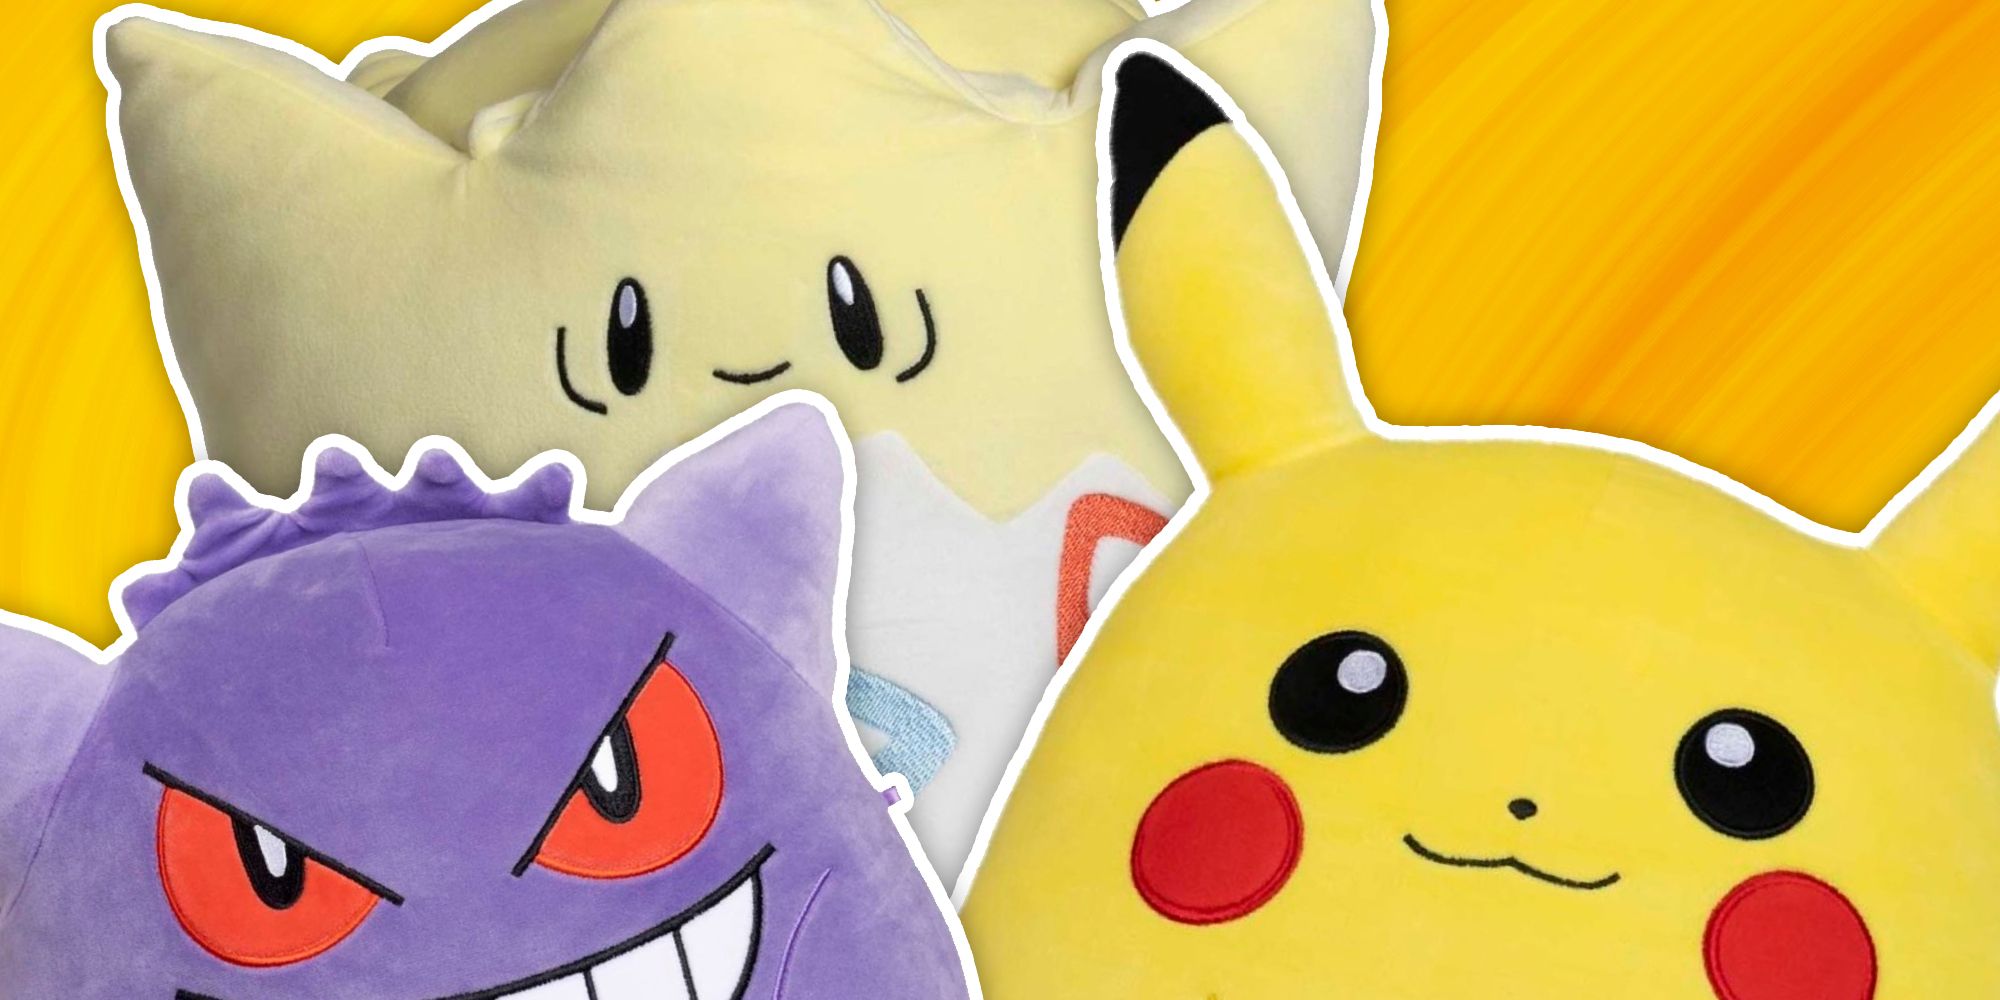 Gengar, Togepi, and Pikachu Squishmallows on a yellow background.